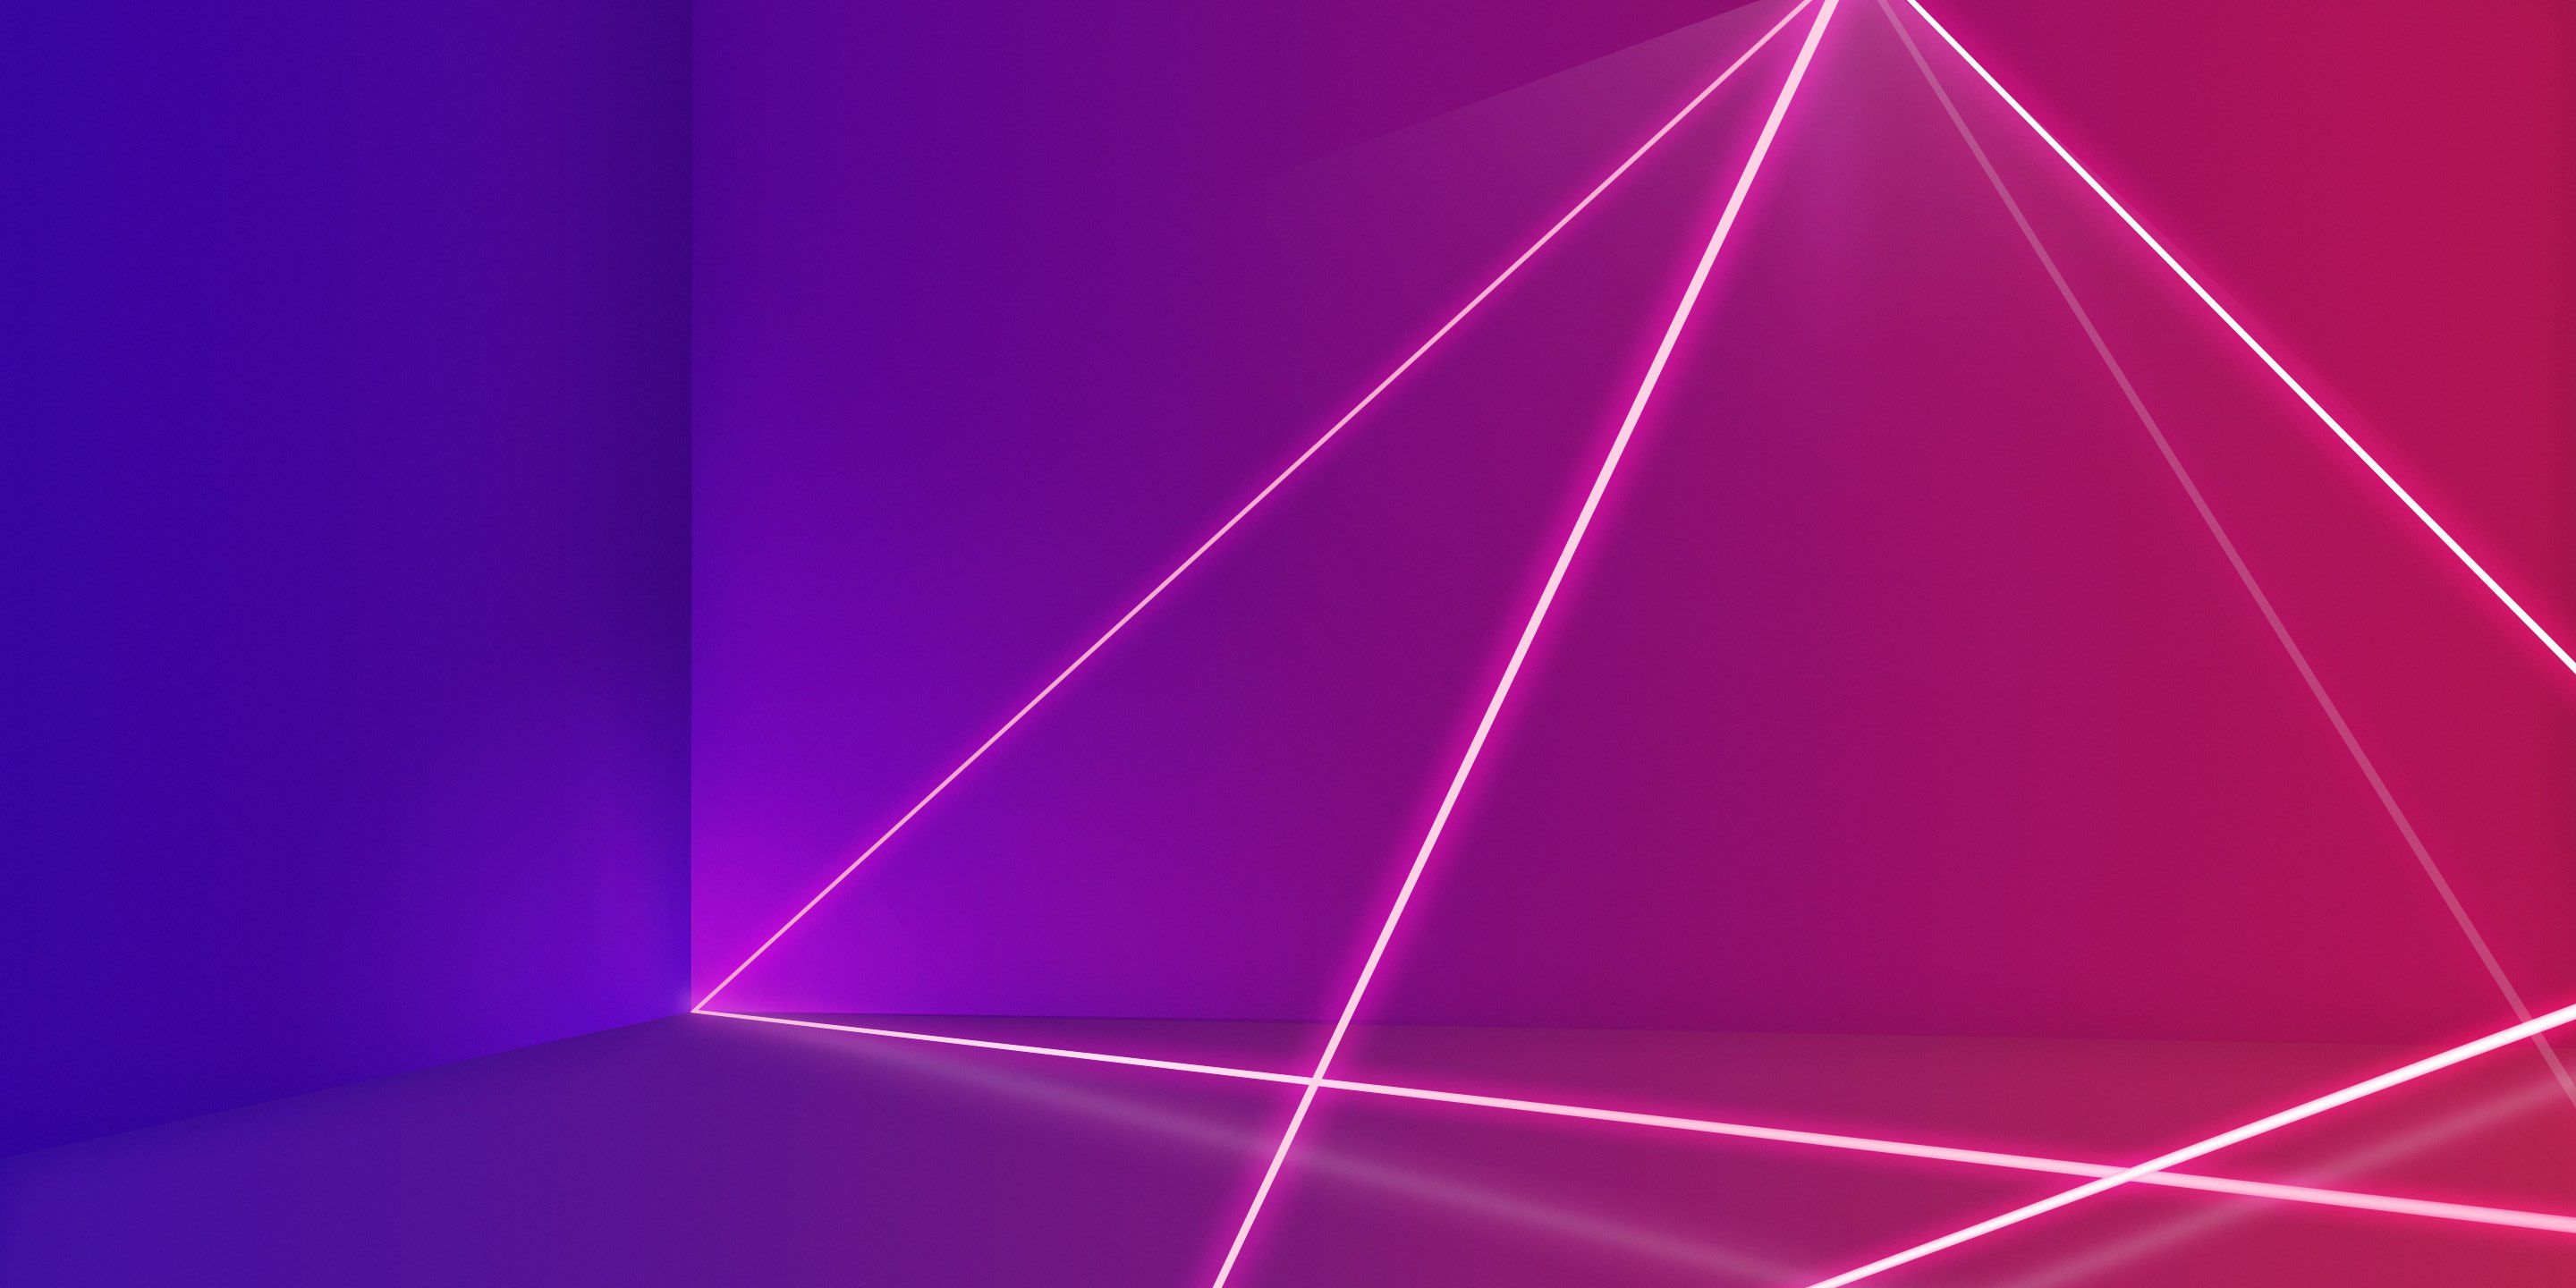 Abstract Laser Wallpapers